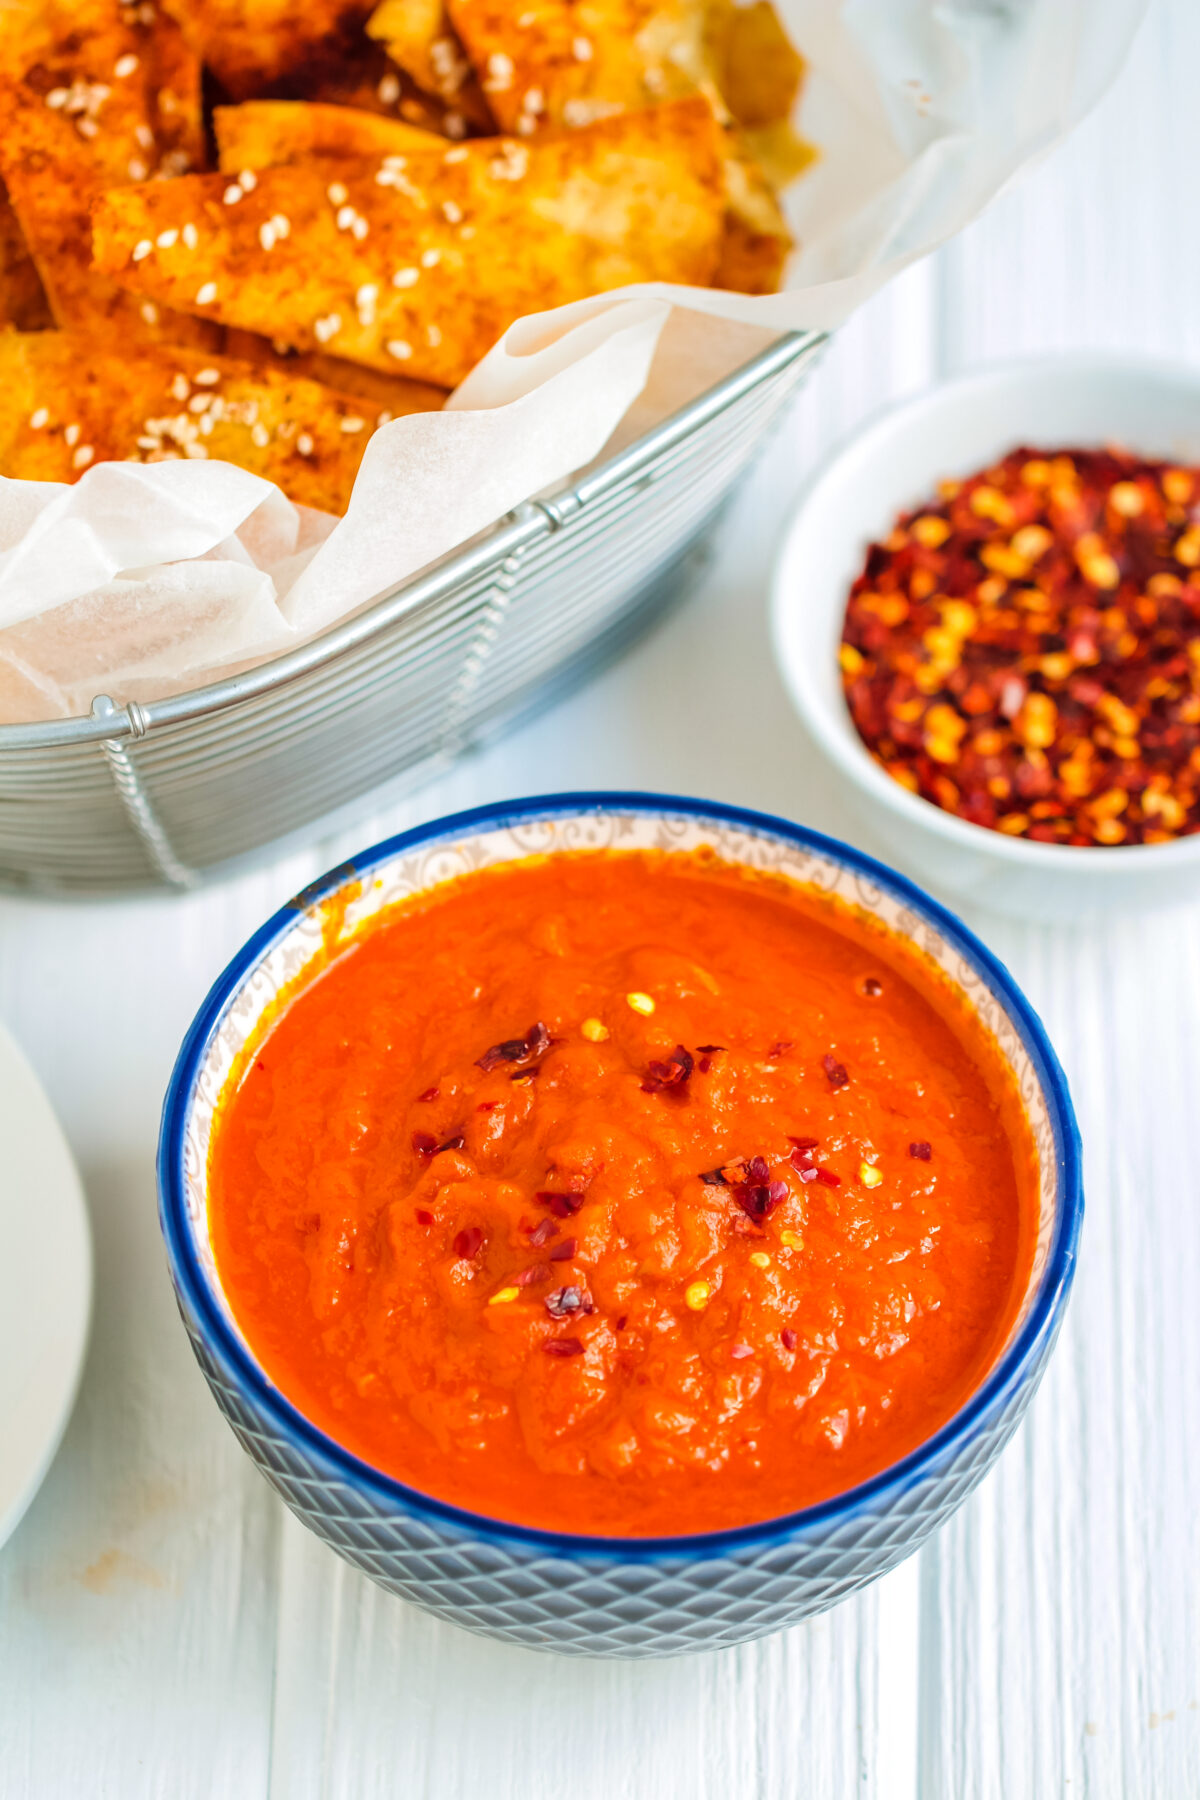 Smoky Spanish tomato dip, or salsa brava, is the perfect appetizer for your next party! Bravas sauce is full of flavour and easy to make!